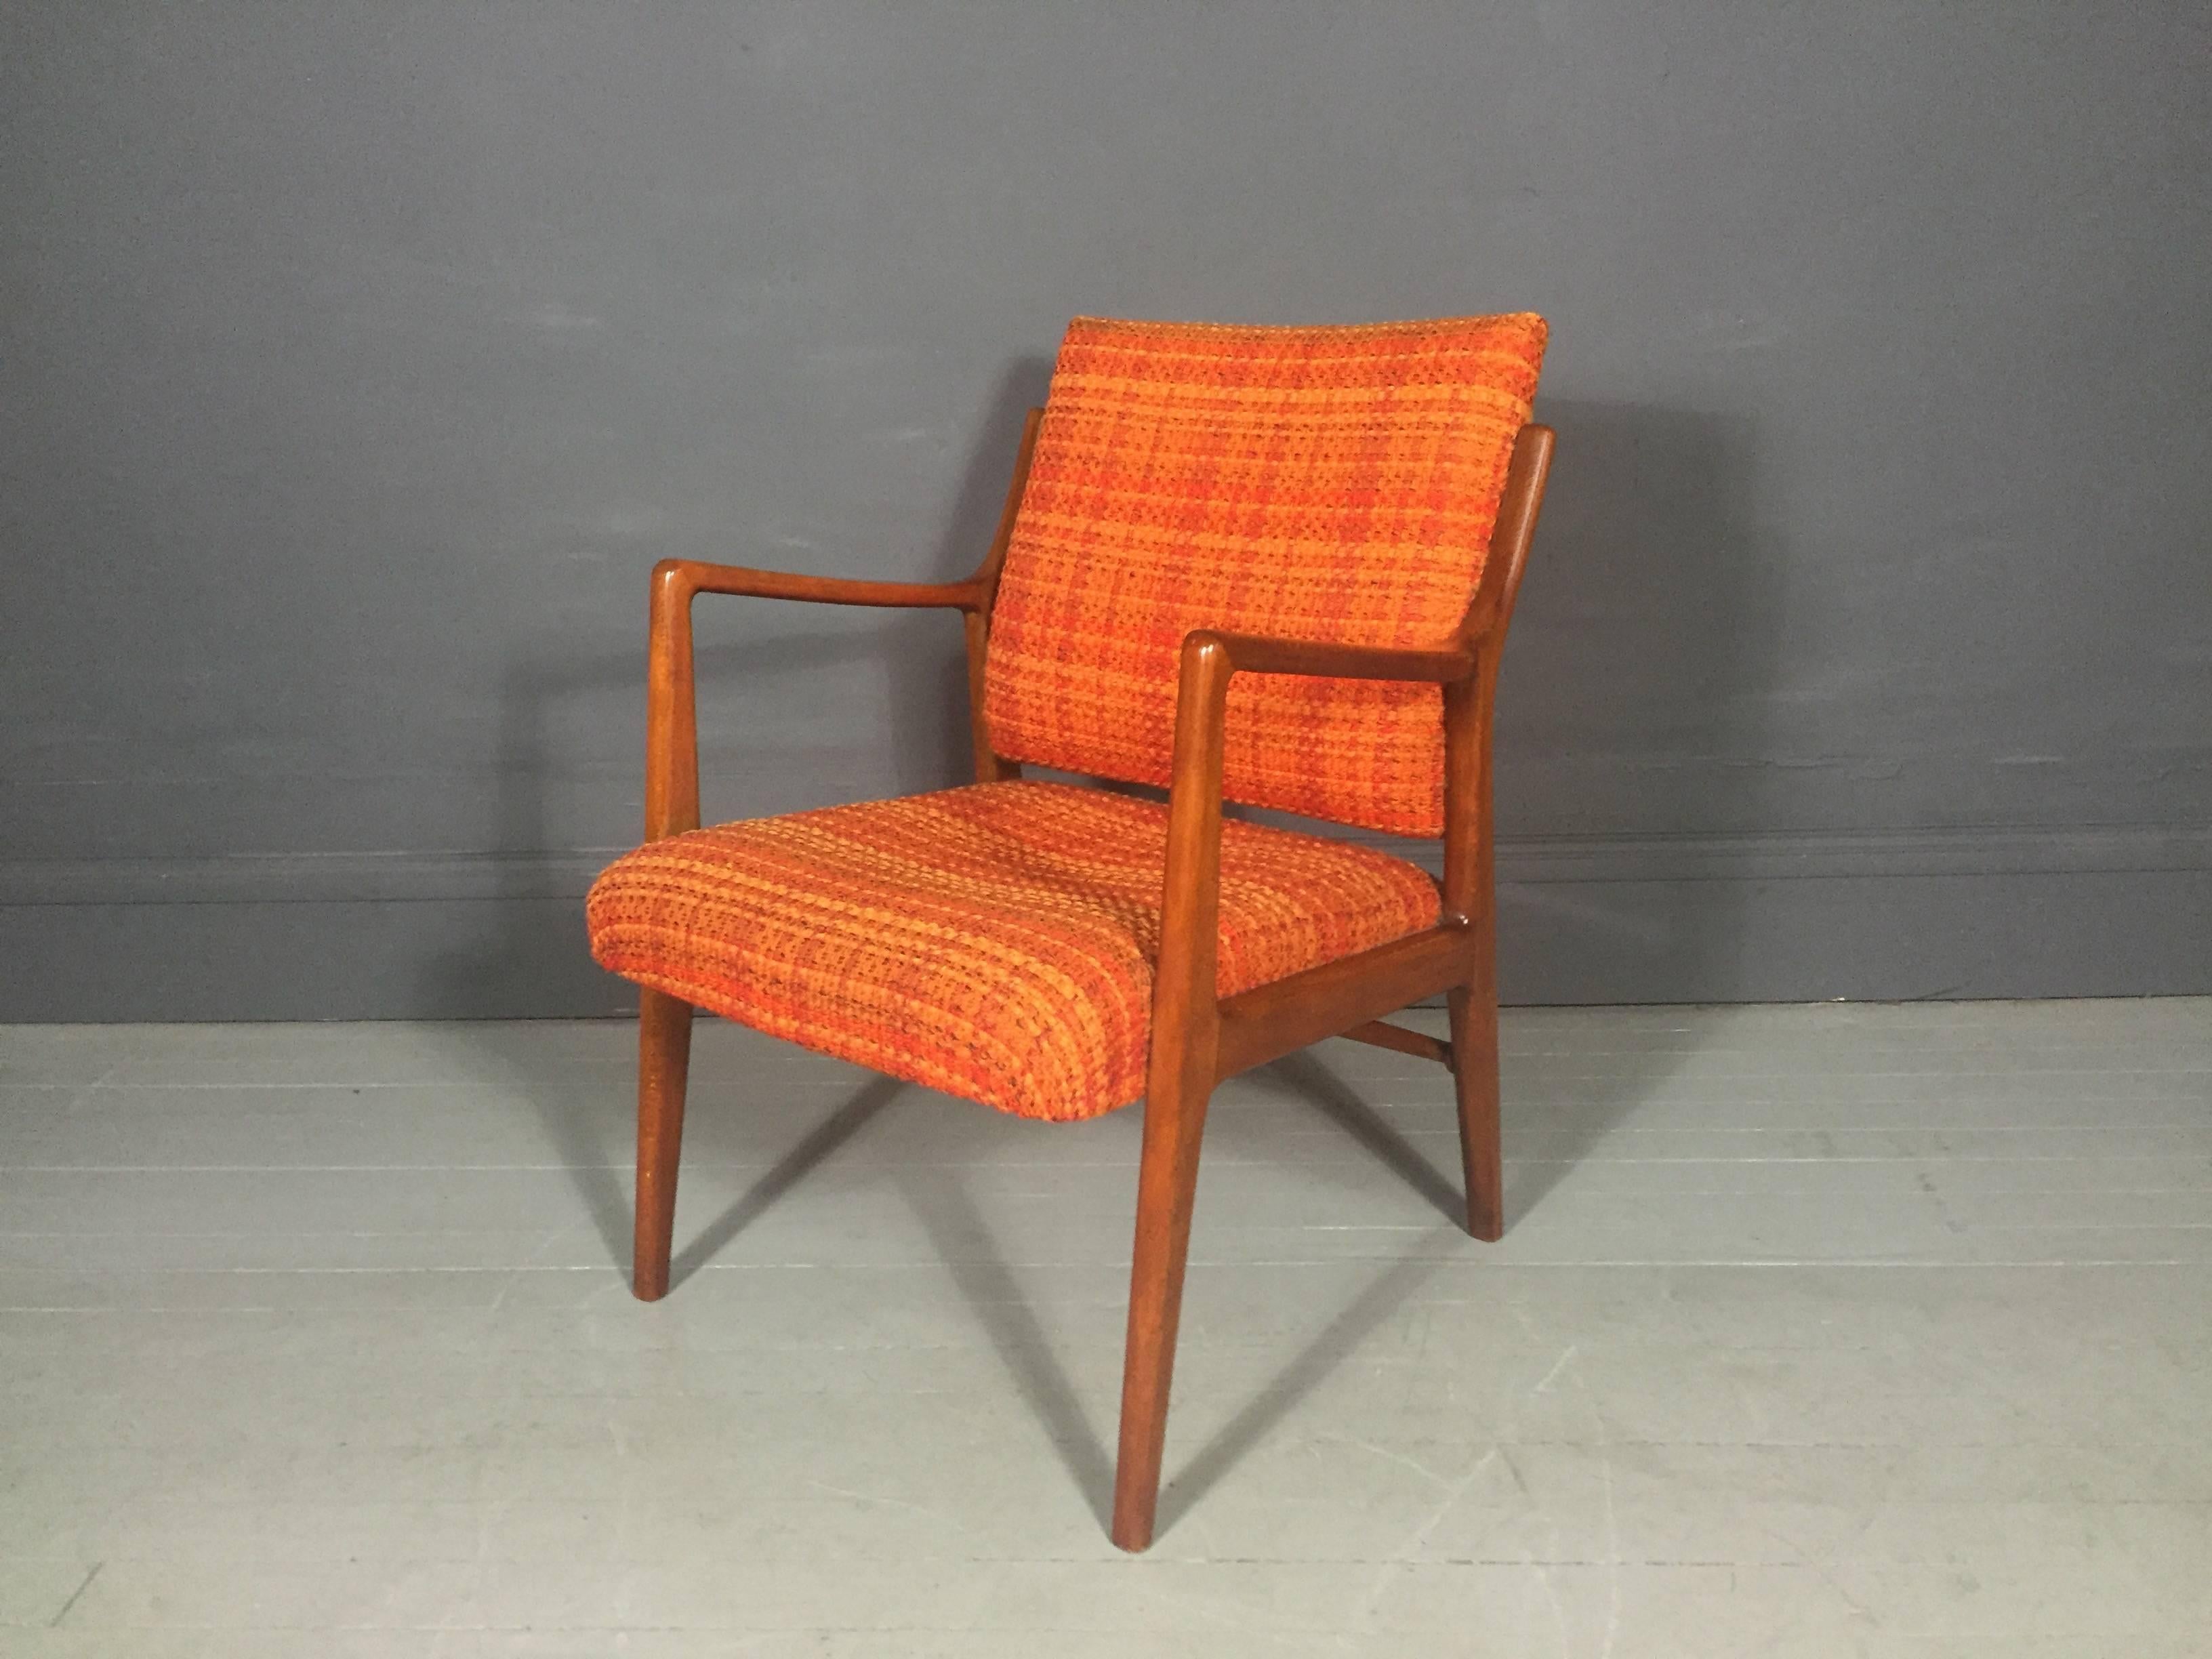 A Classic Mid-Century Scandinavian design armchair with an amazing newer bright woven wool upholstery in shades of orange, teakwood frame, 1950s.

Excellent condition.